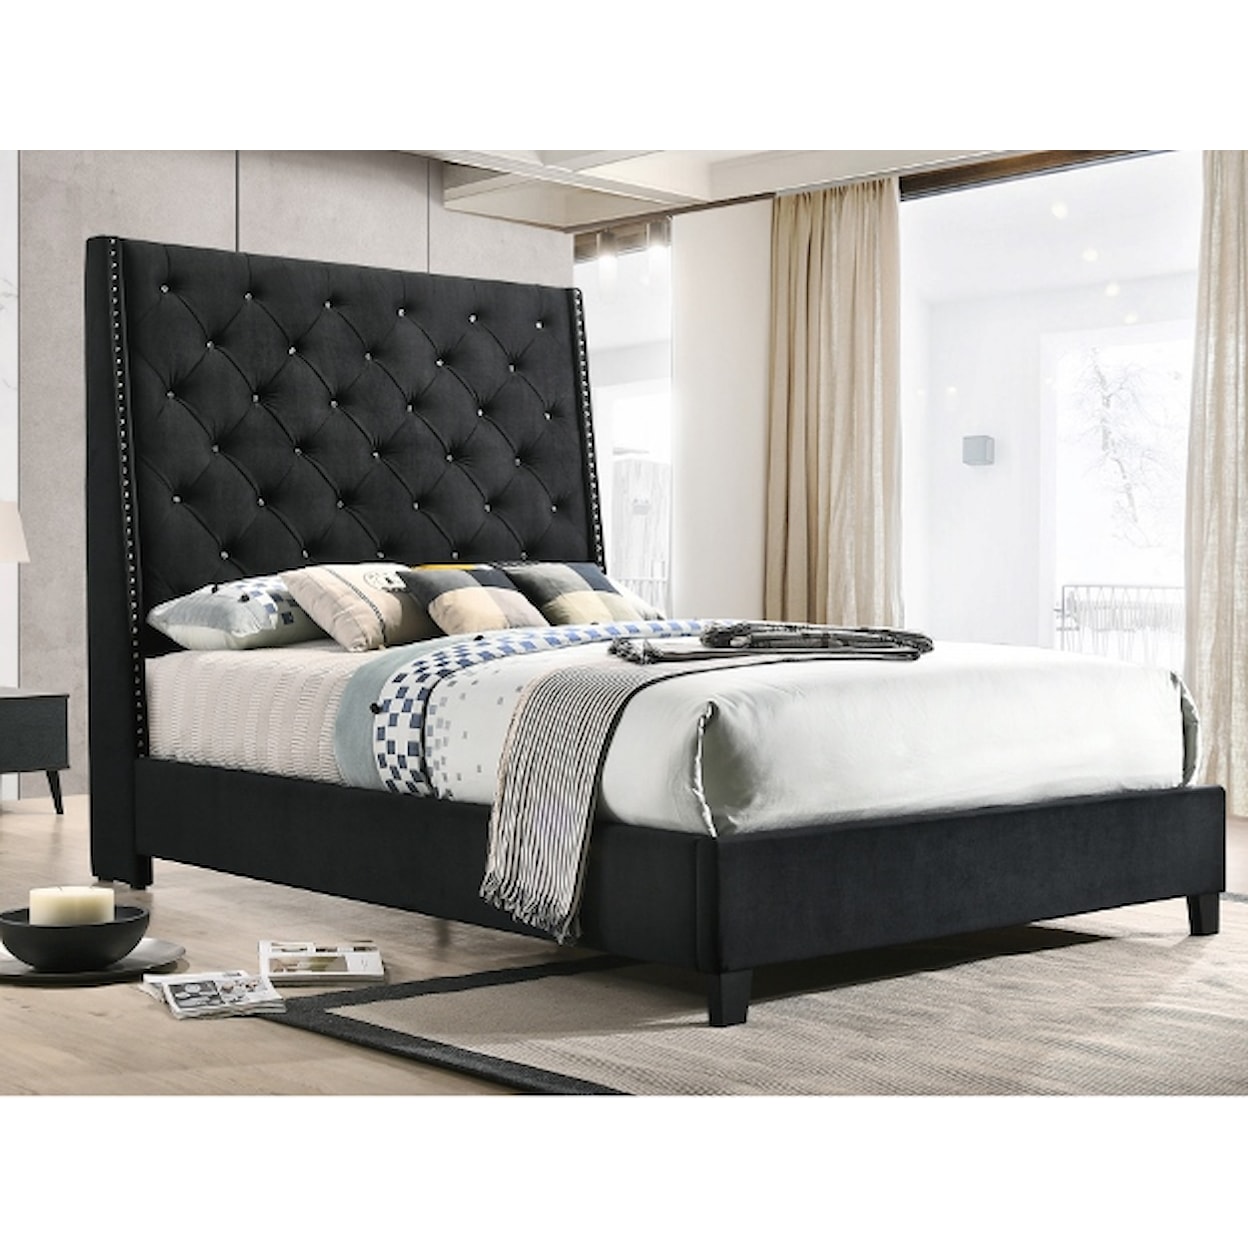 CM Chantilly California King Upholstered Bed